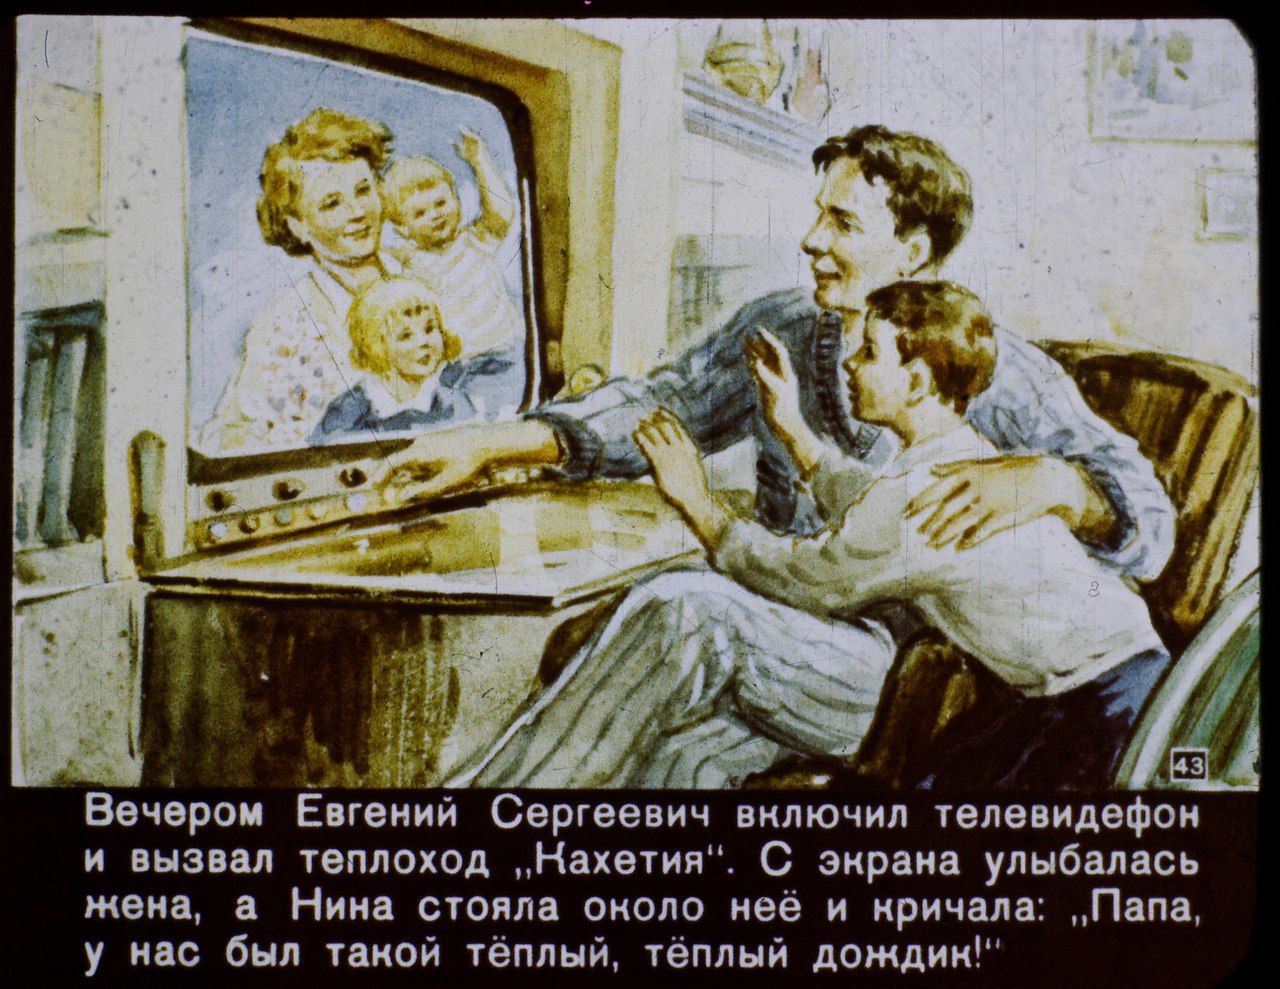 How Russians Imagined The Year 2017 In 1960